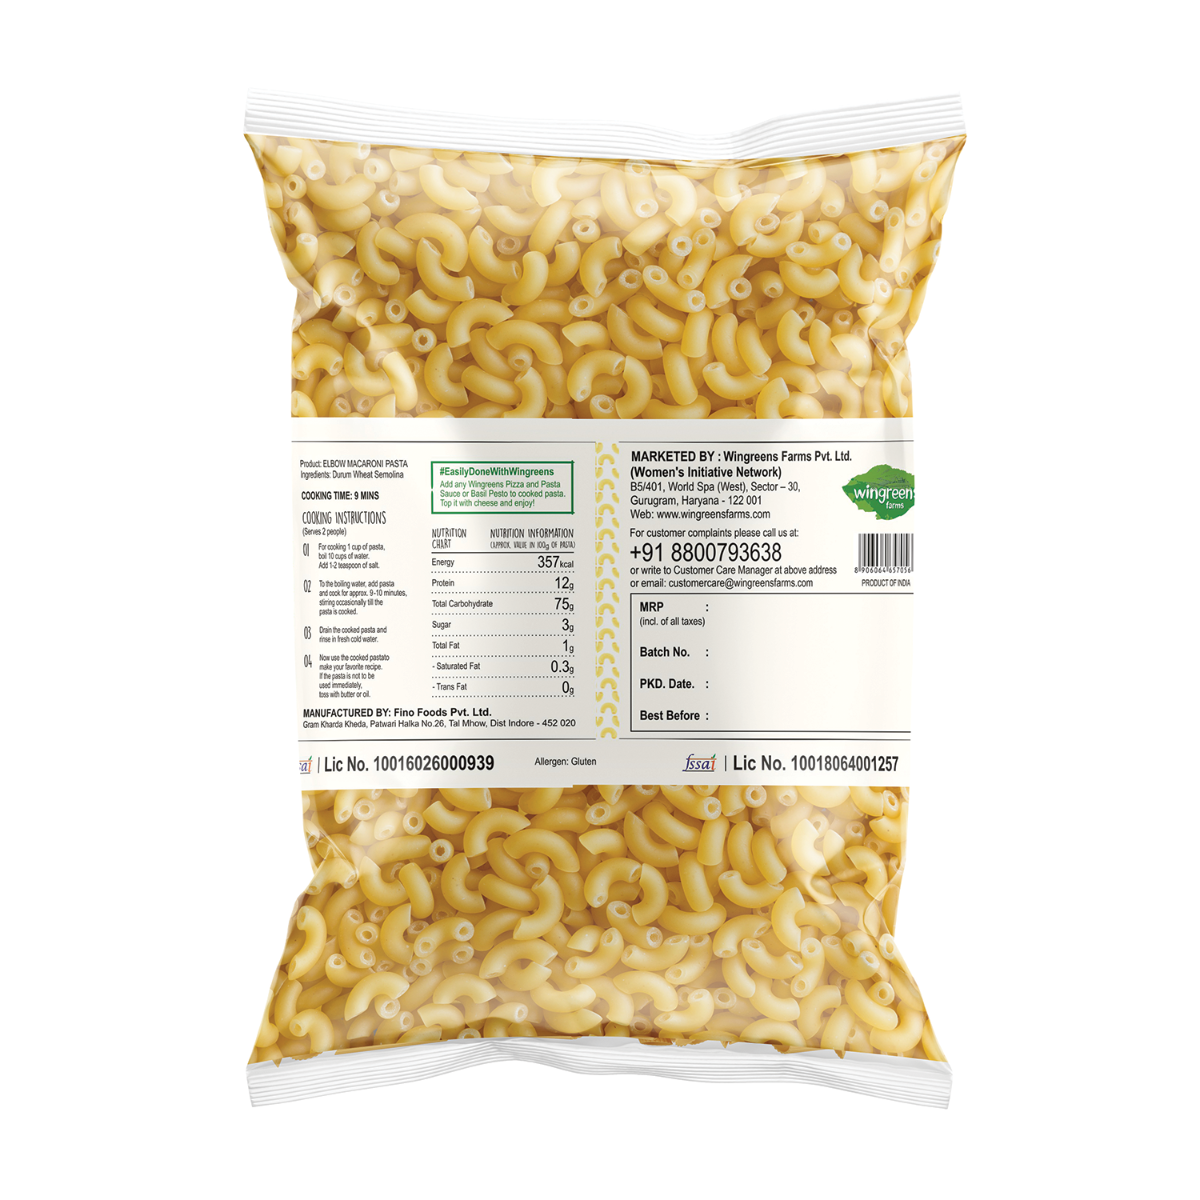 Elbow Macaroni (400g) with Cheesy Chipotle Sauce (180g)